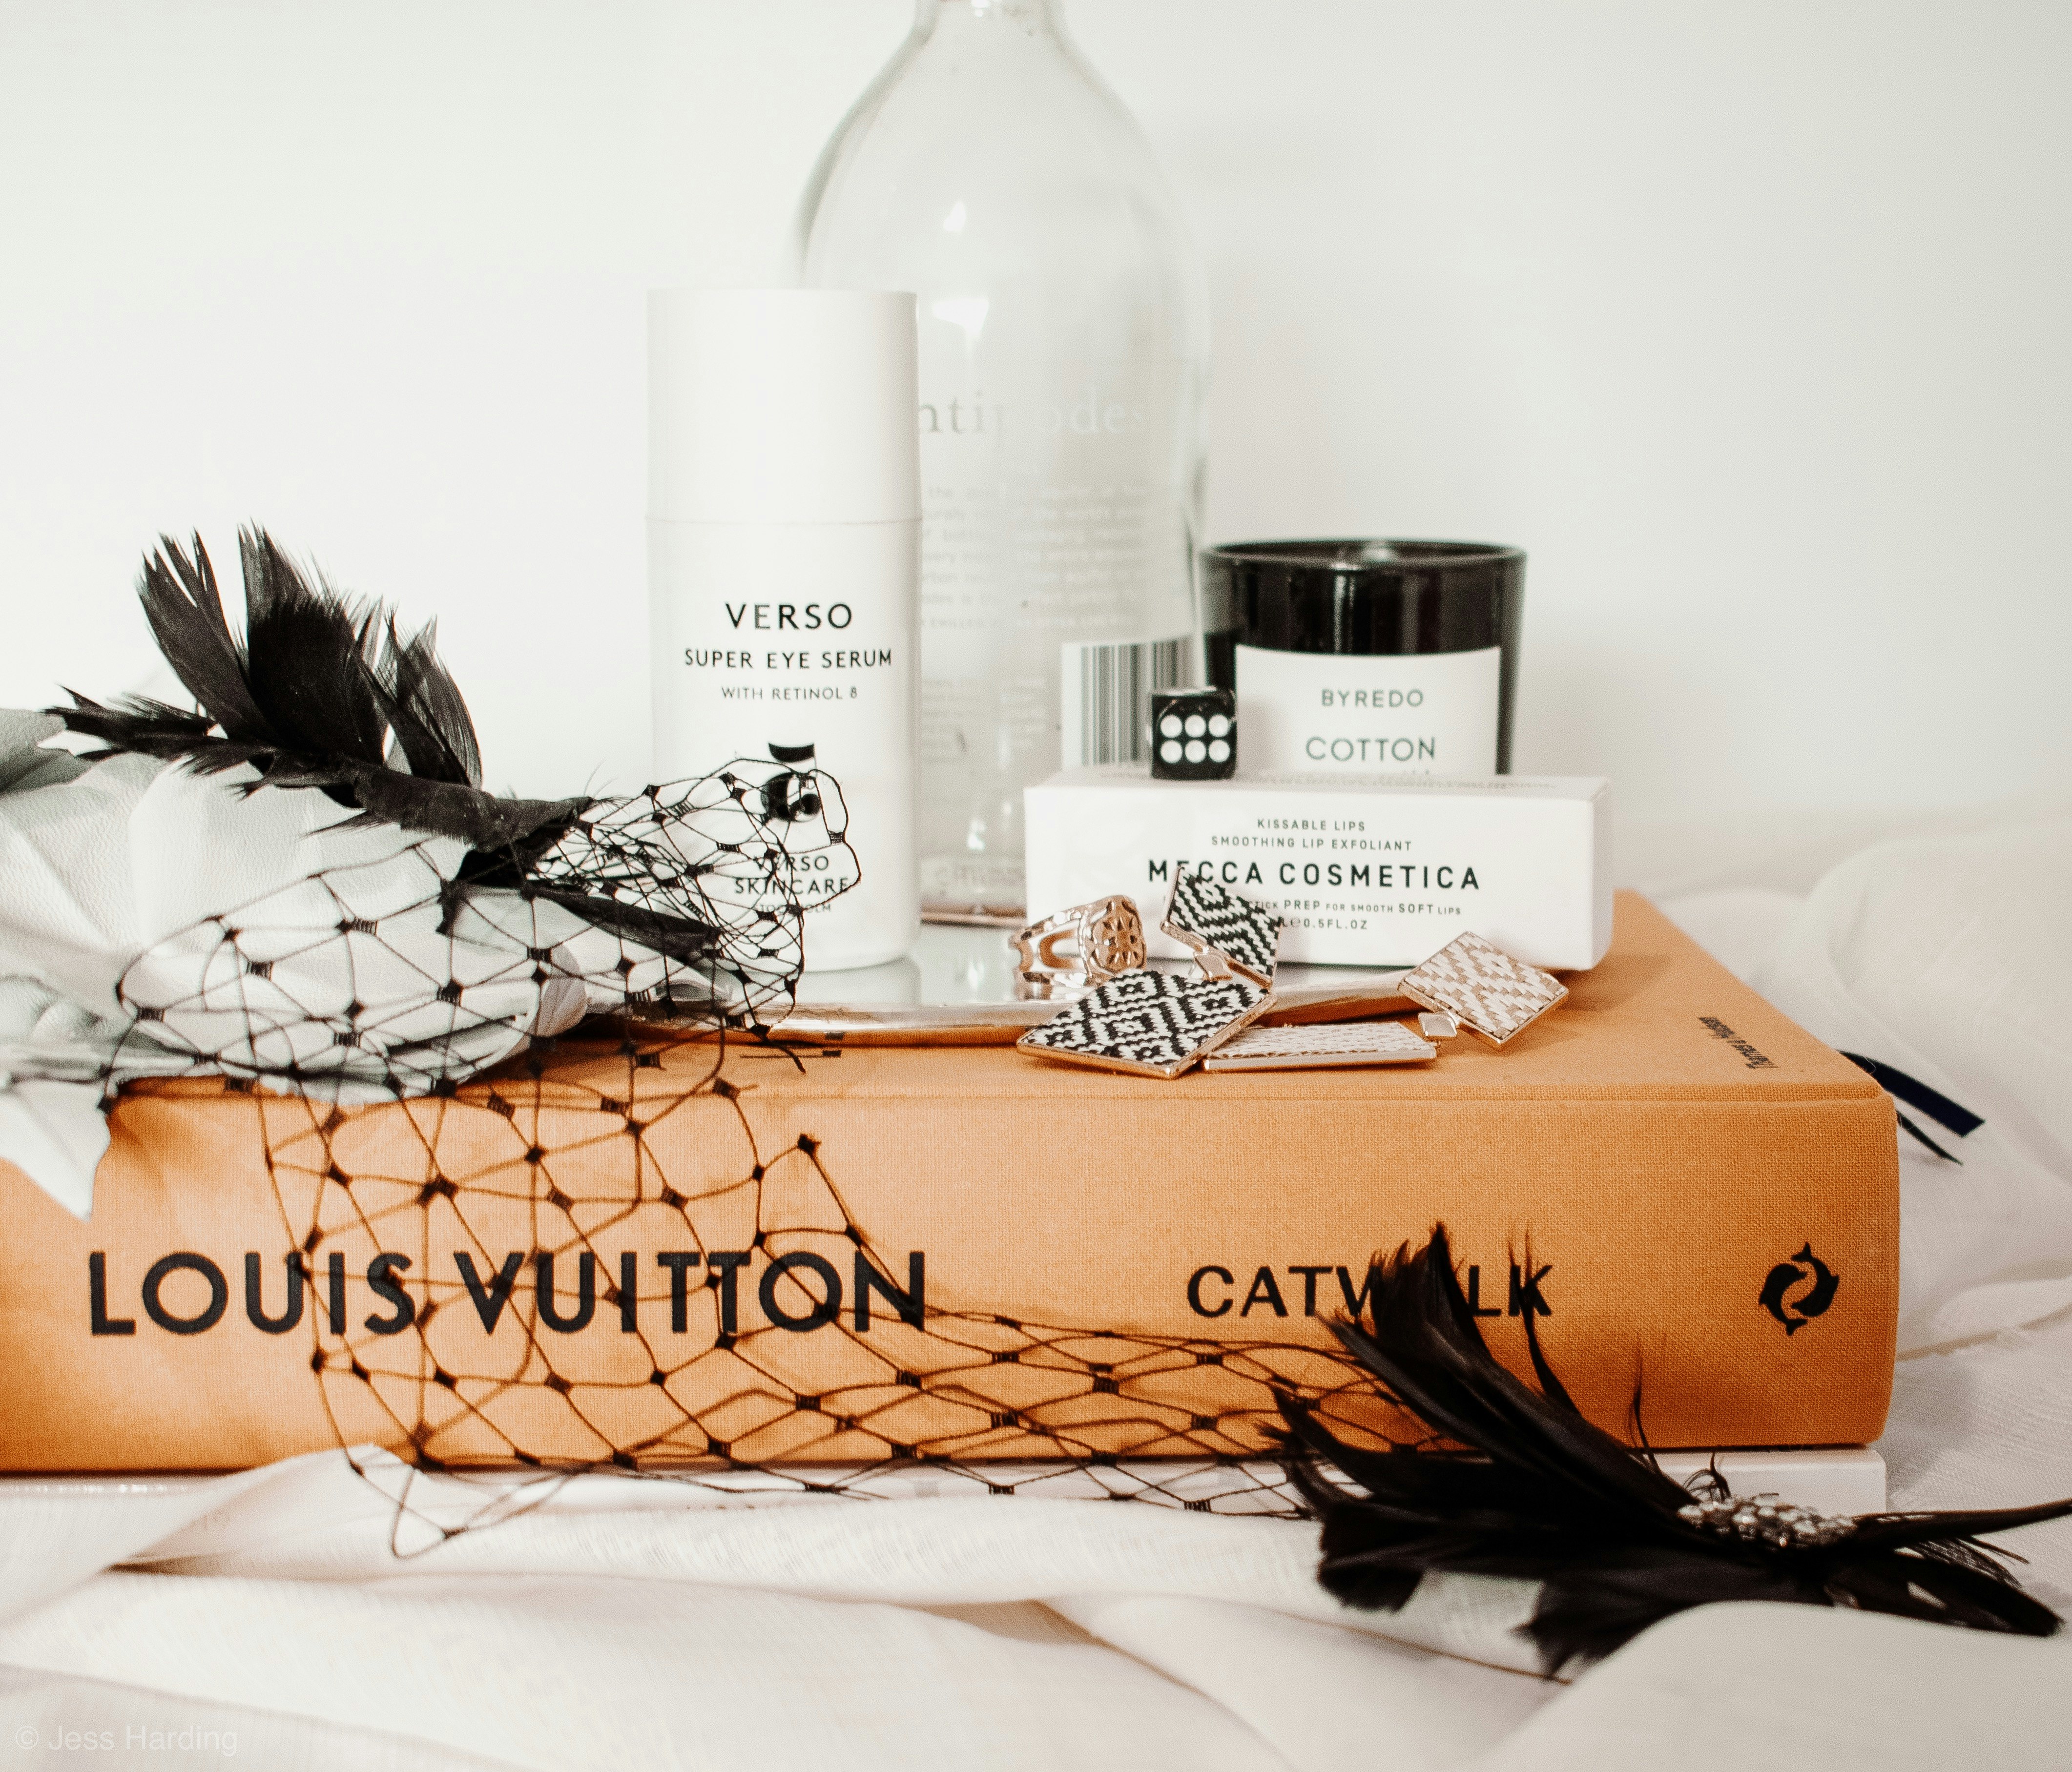 assorted product on Louis Vuitton box